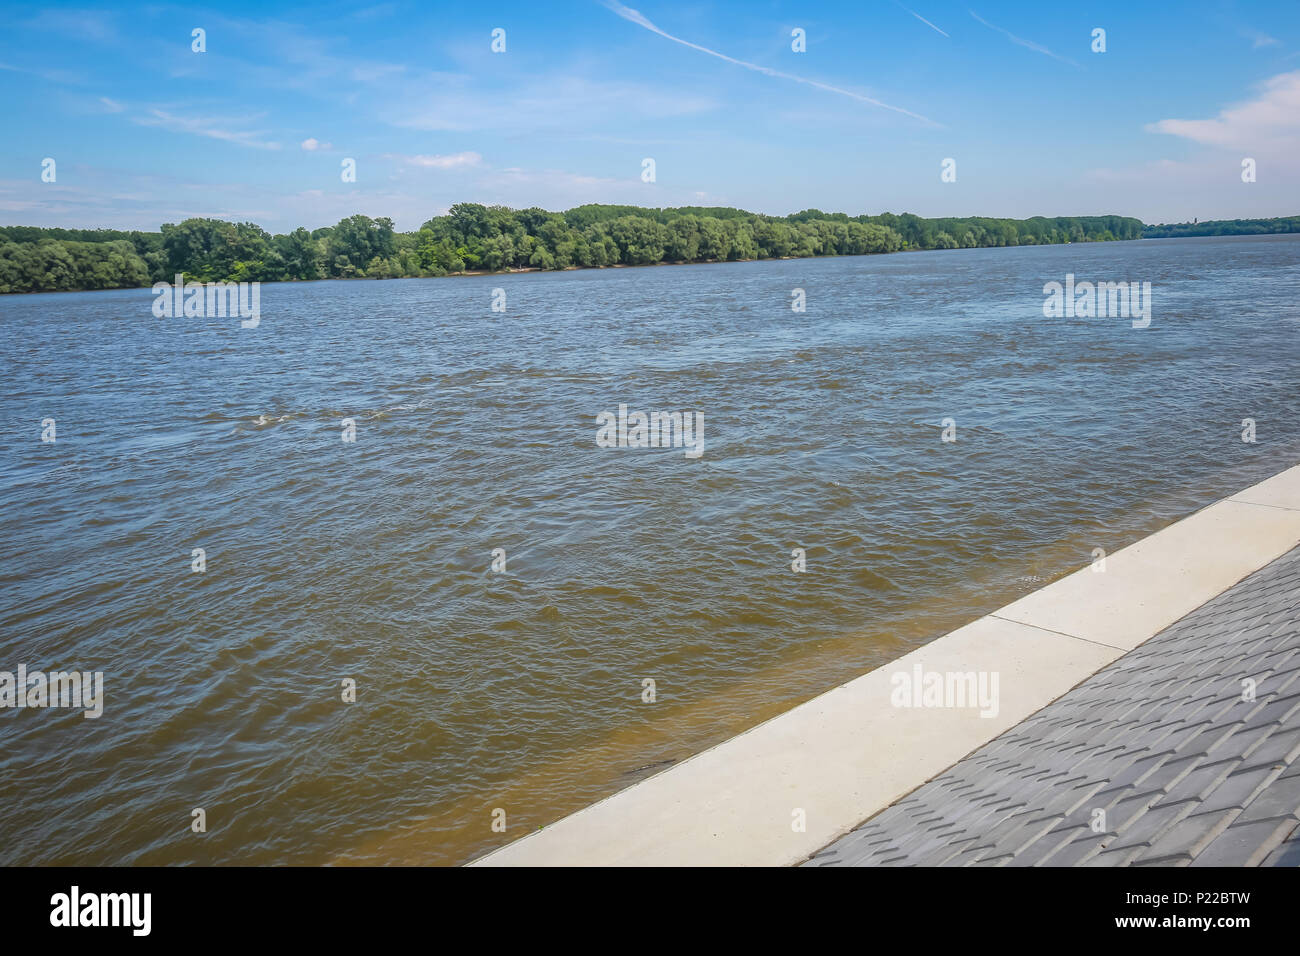 A new embankment on the shore of river Danube in Vukovar, Croatia. Danube is Europes second longest river. Stock Photo